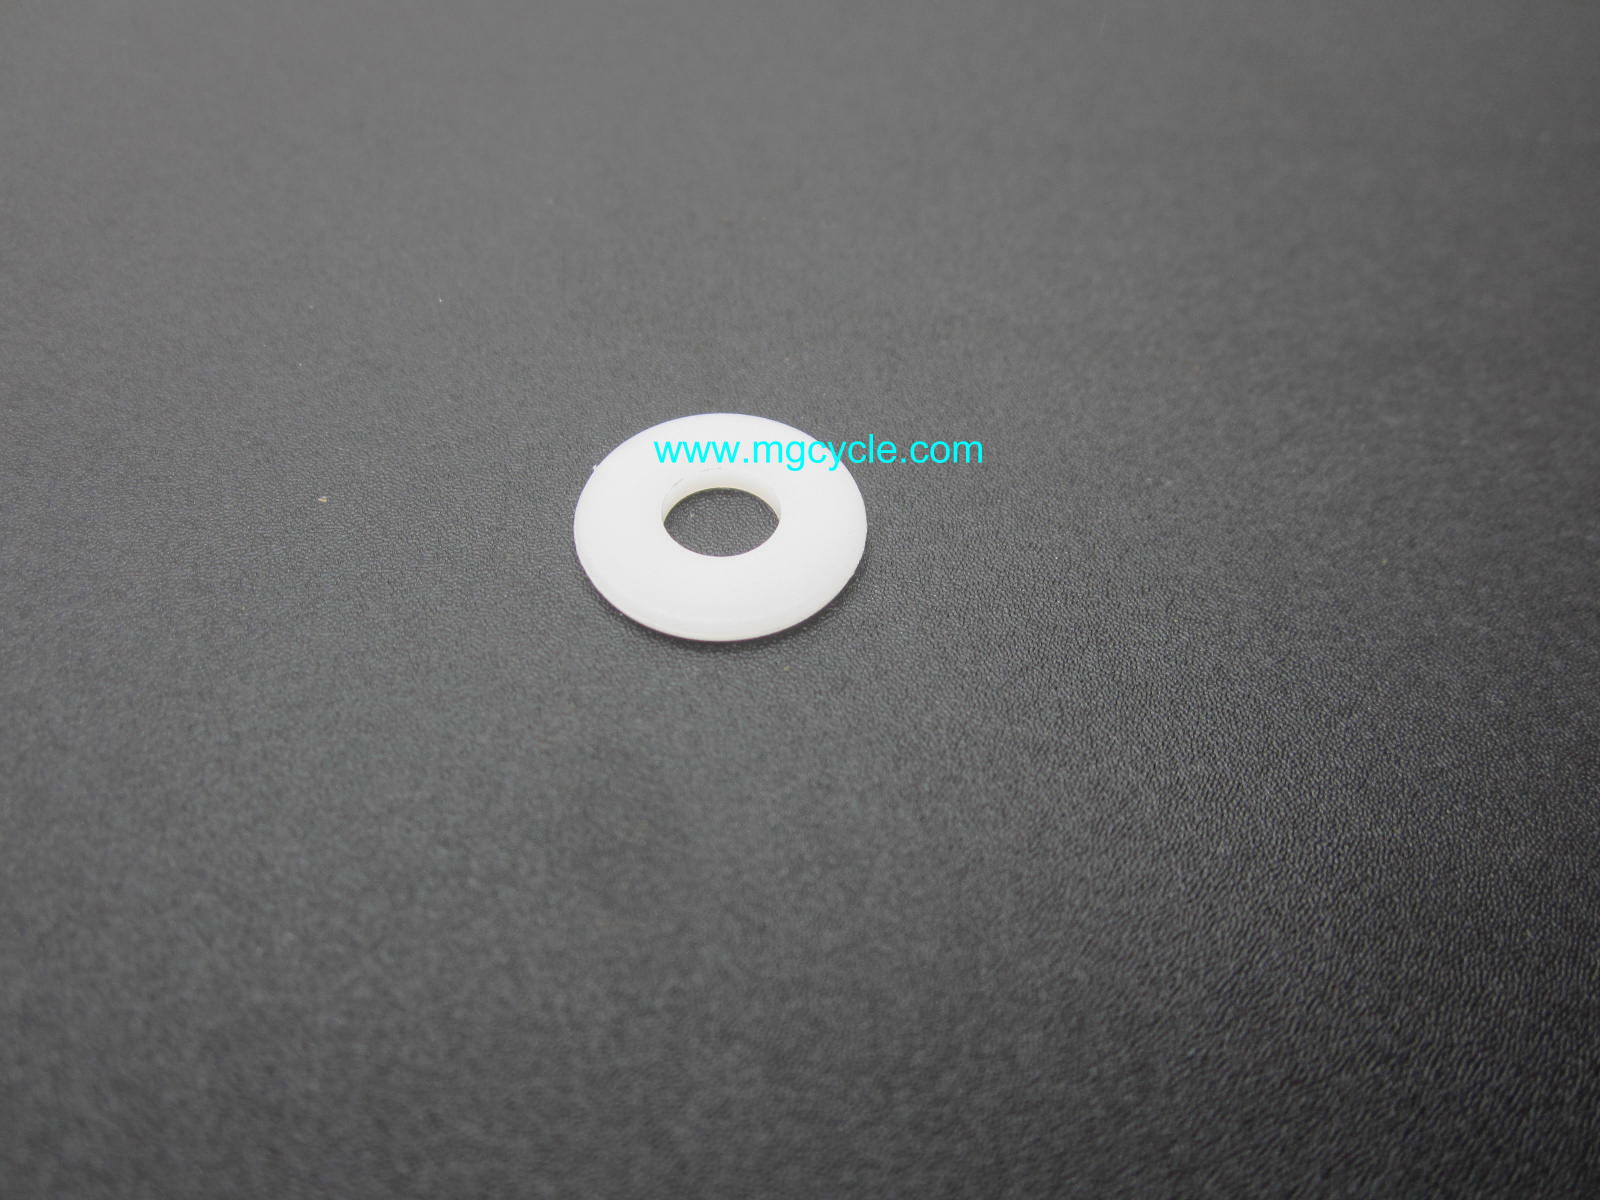 Nylon washer, under body panel and side cover screw heads